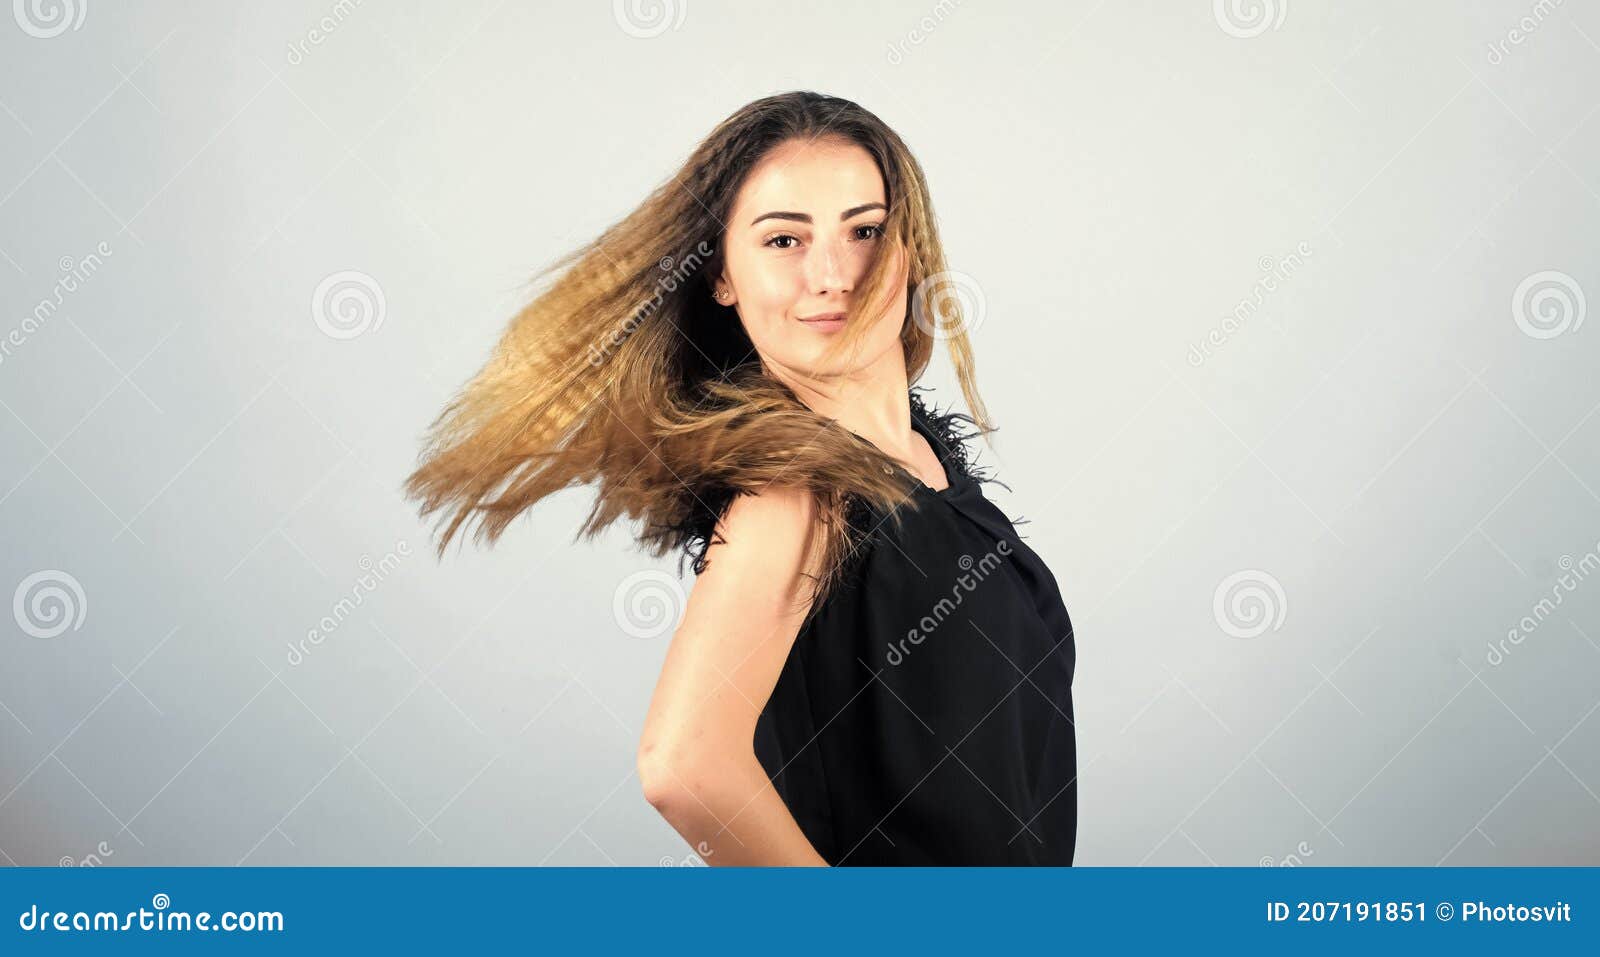 Add Some Action To Your Life. Stylish Hair. Woman in Hipster Trend. Woman  with Long Hair Stock Image - Image of hipster, figure: 207191851